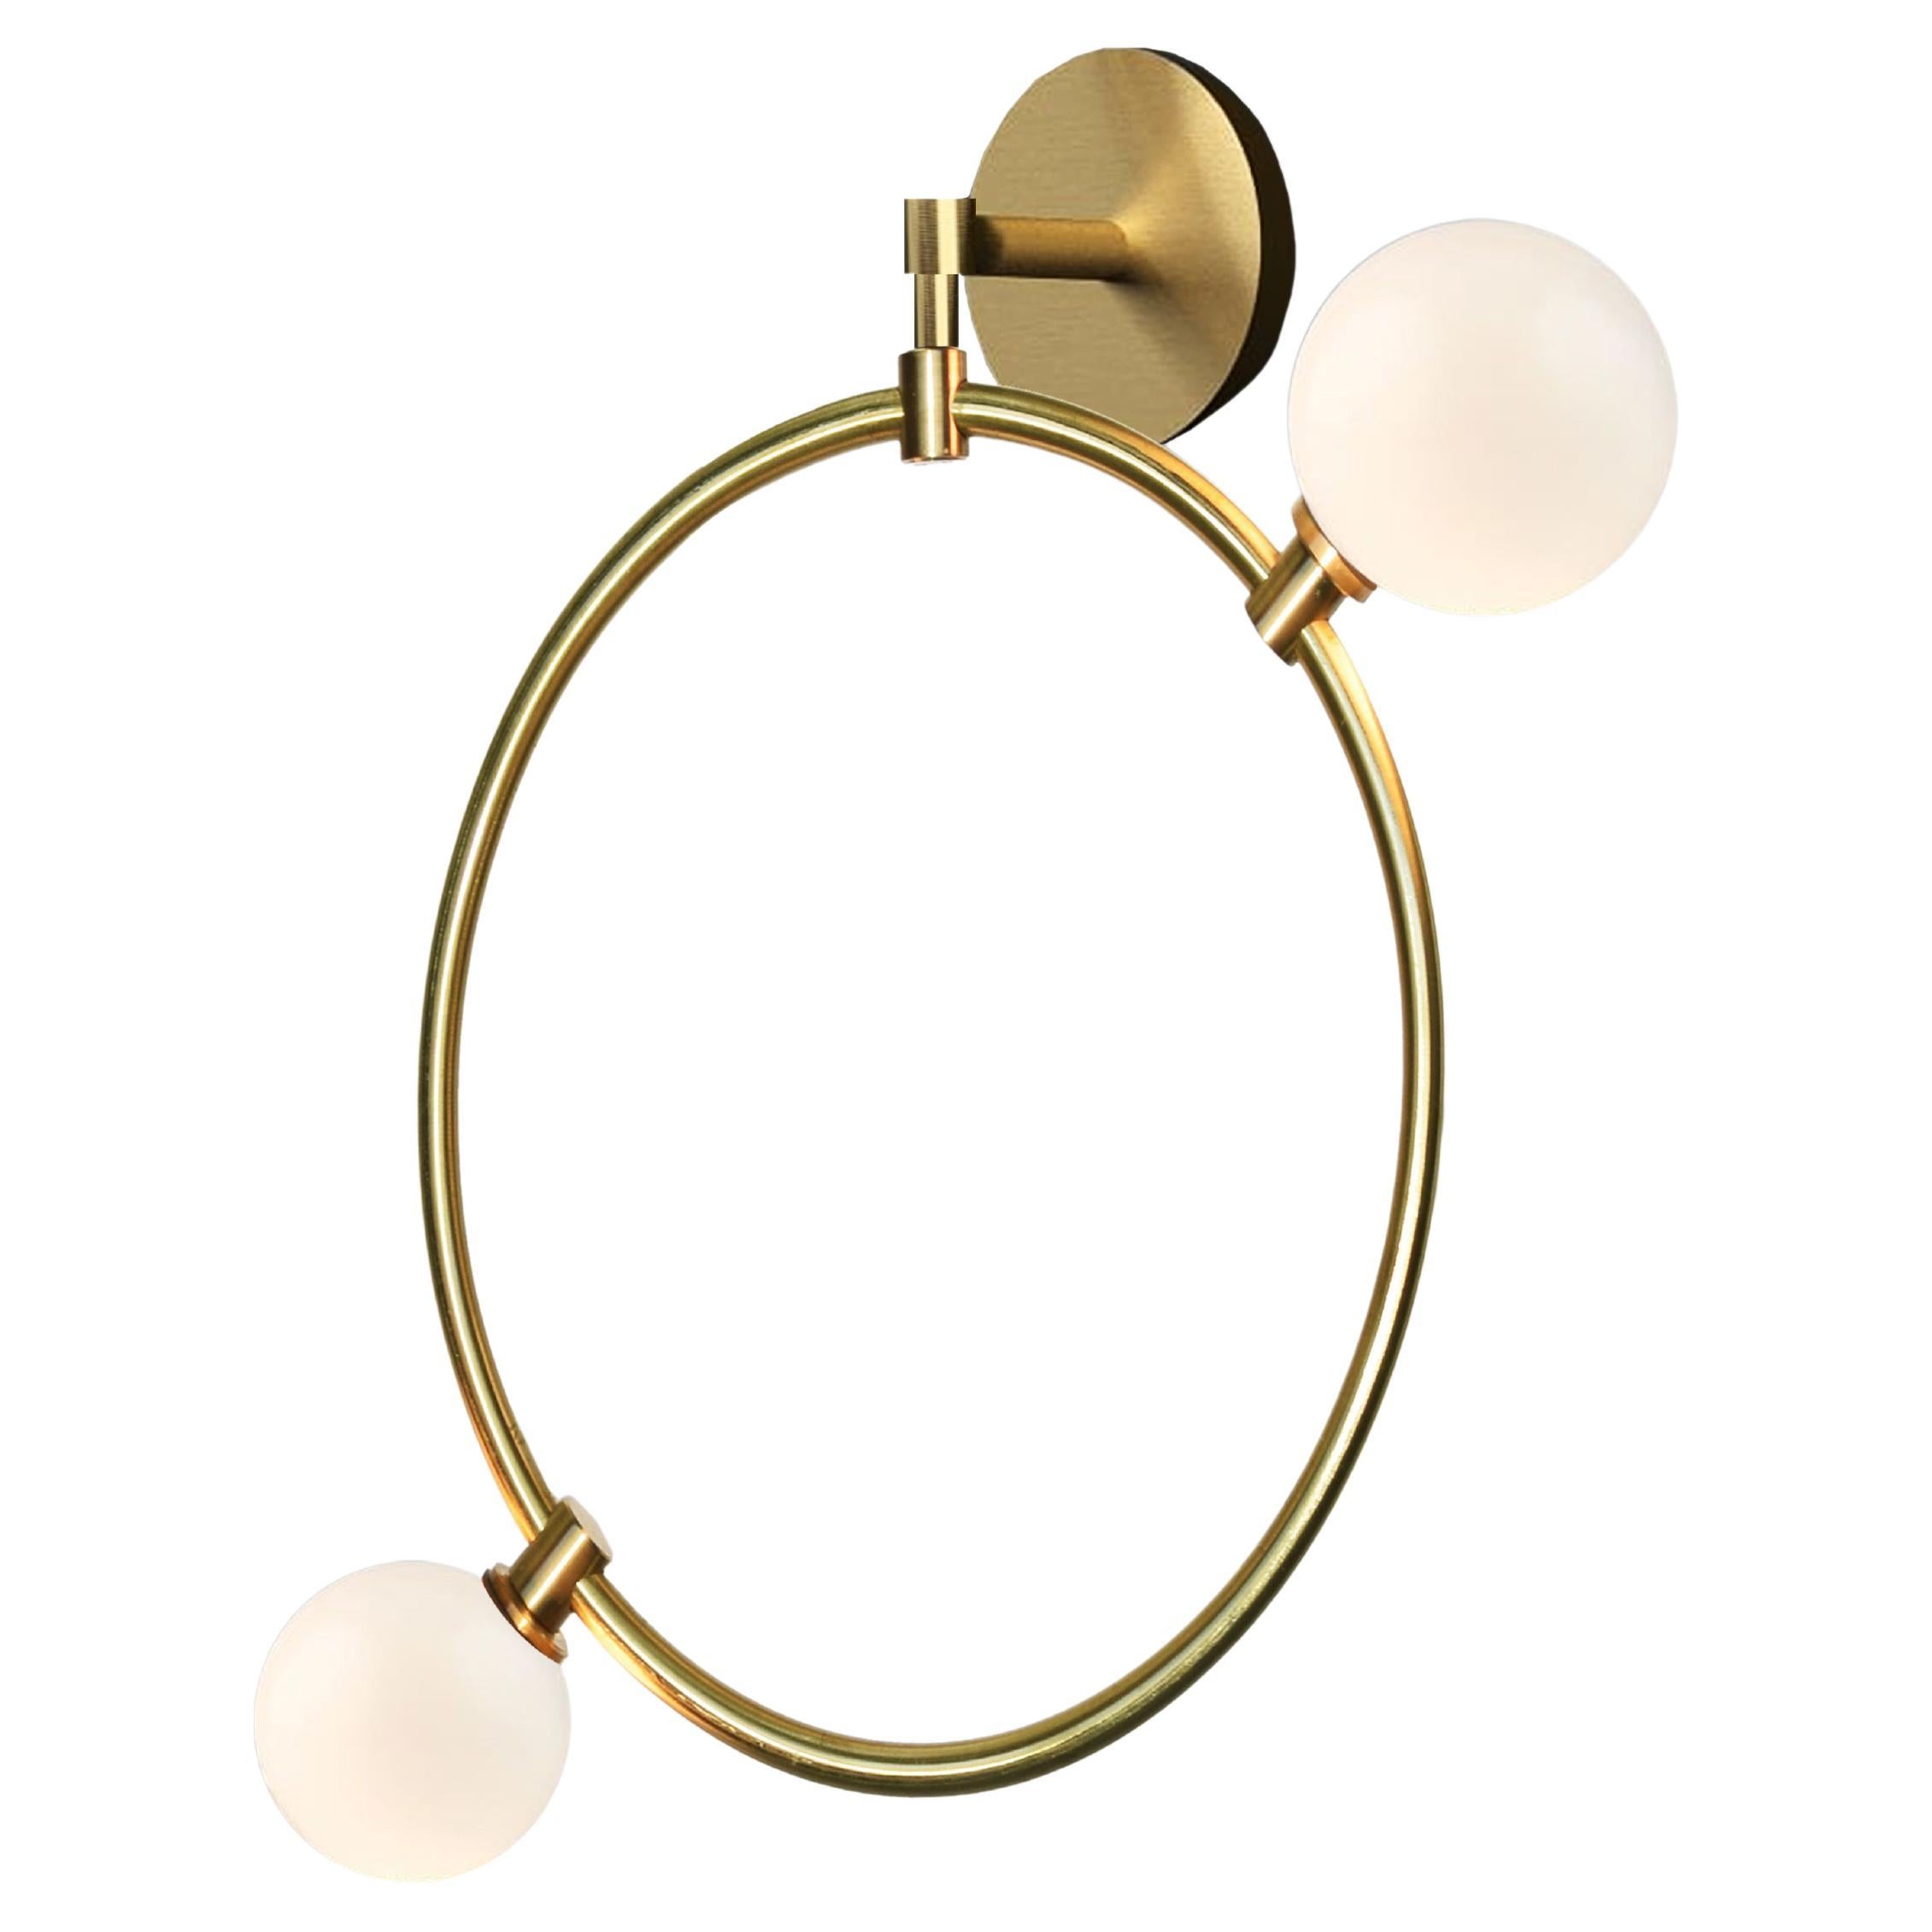 'Drops Wall - Large' by Marc Wood. Handmade Brass Ring Lamp, Opal Glass Shades For Sale